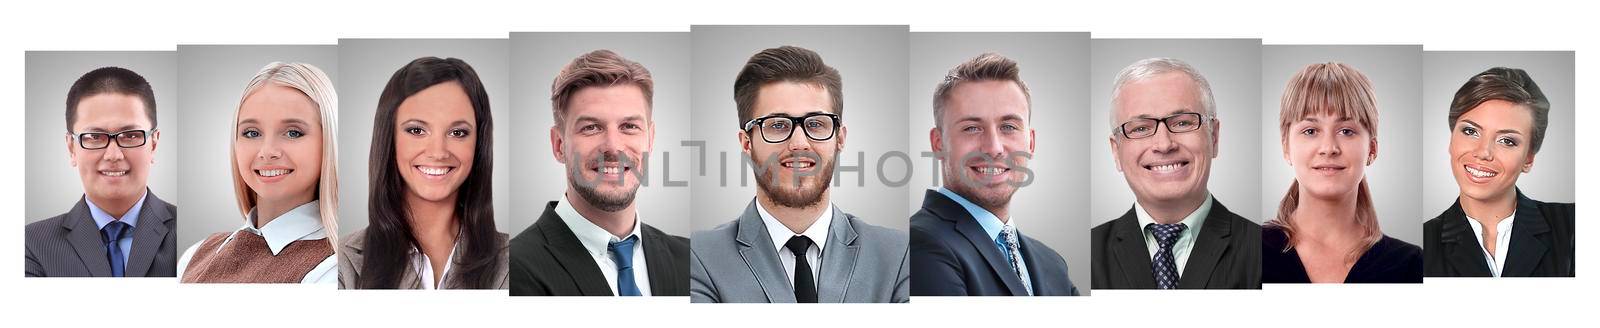 panoramic collage of portraits of young entrepreneurs. by asdf